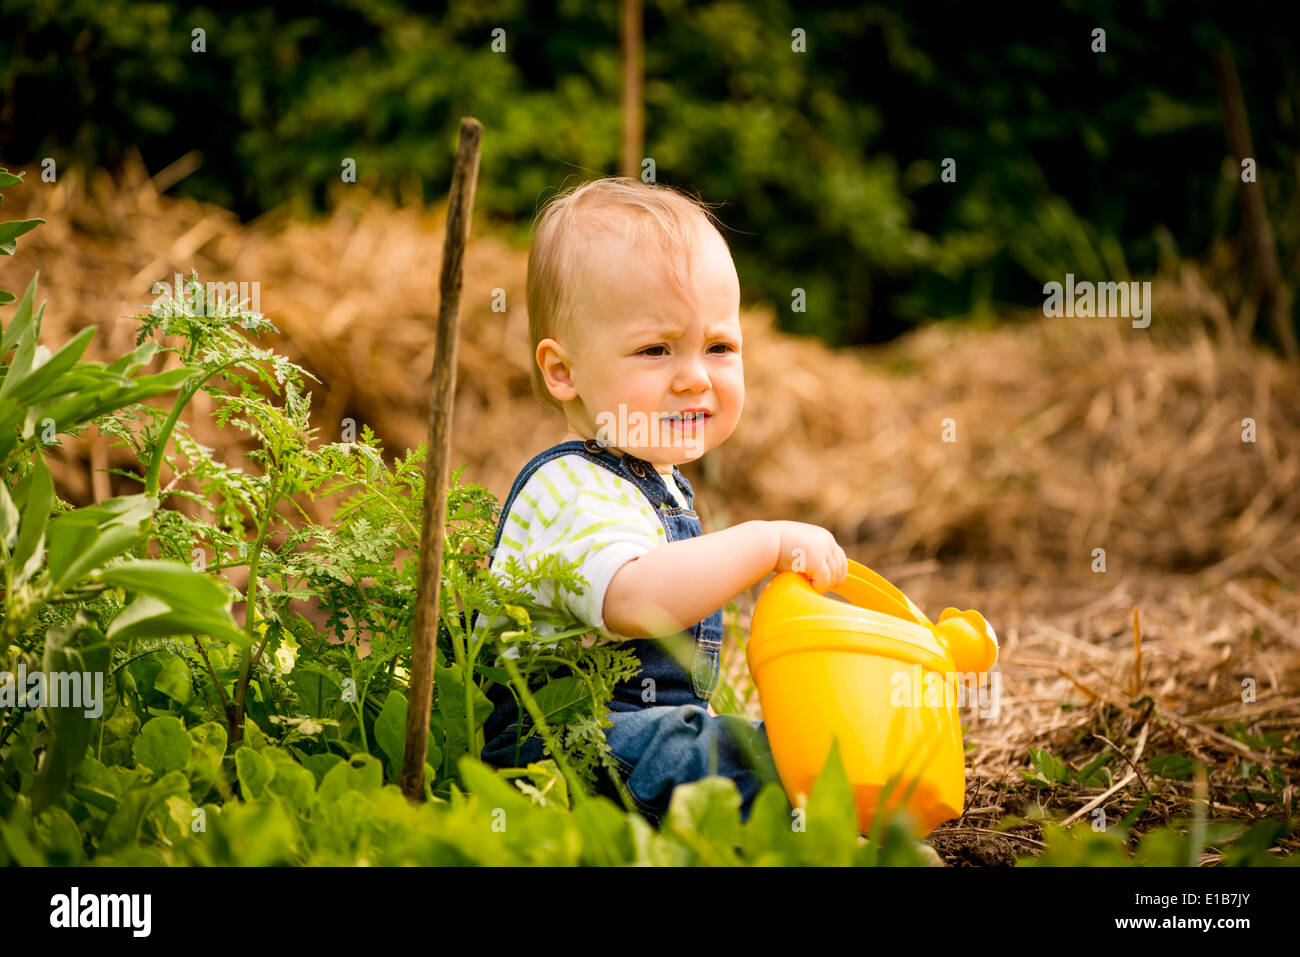 Little baby girl relaxes with watering can in backyard garden Stock Photo